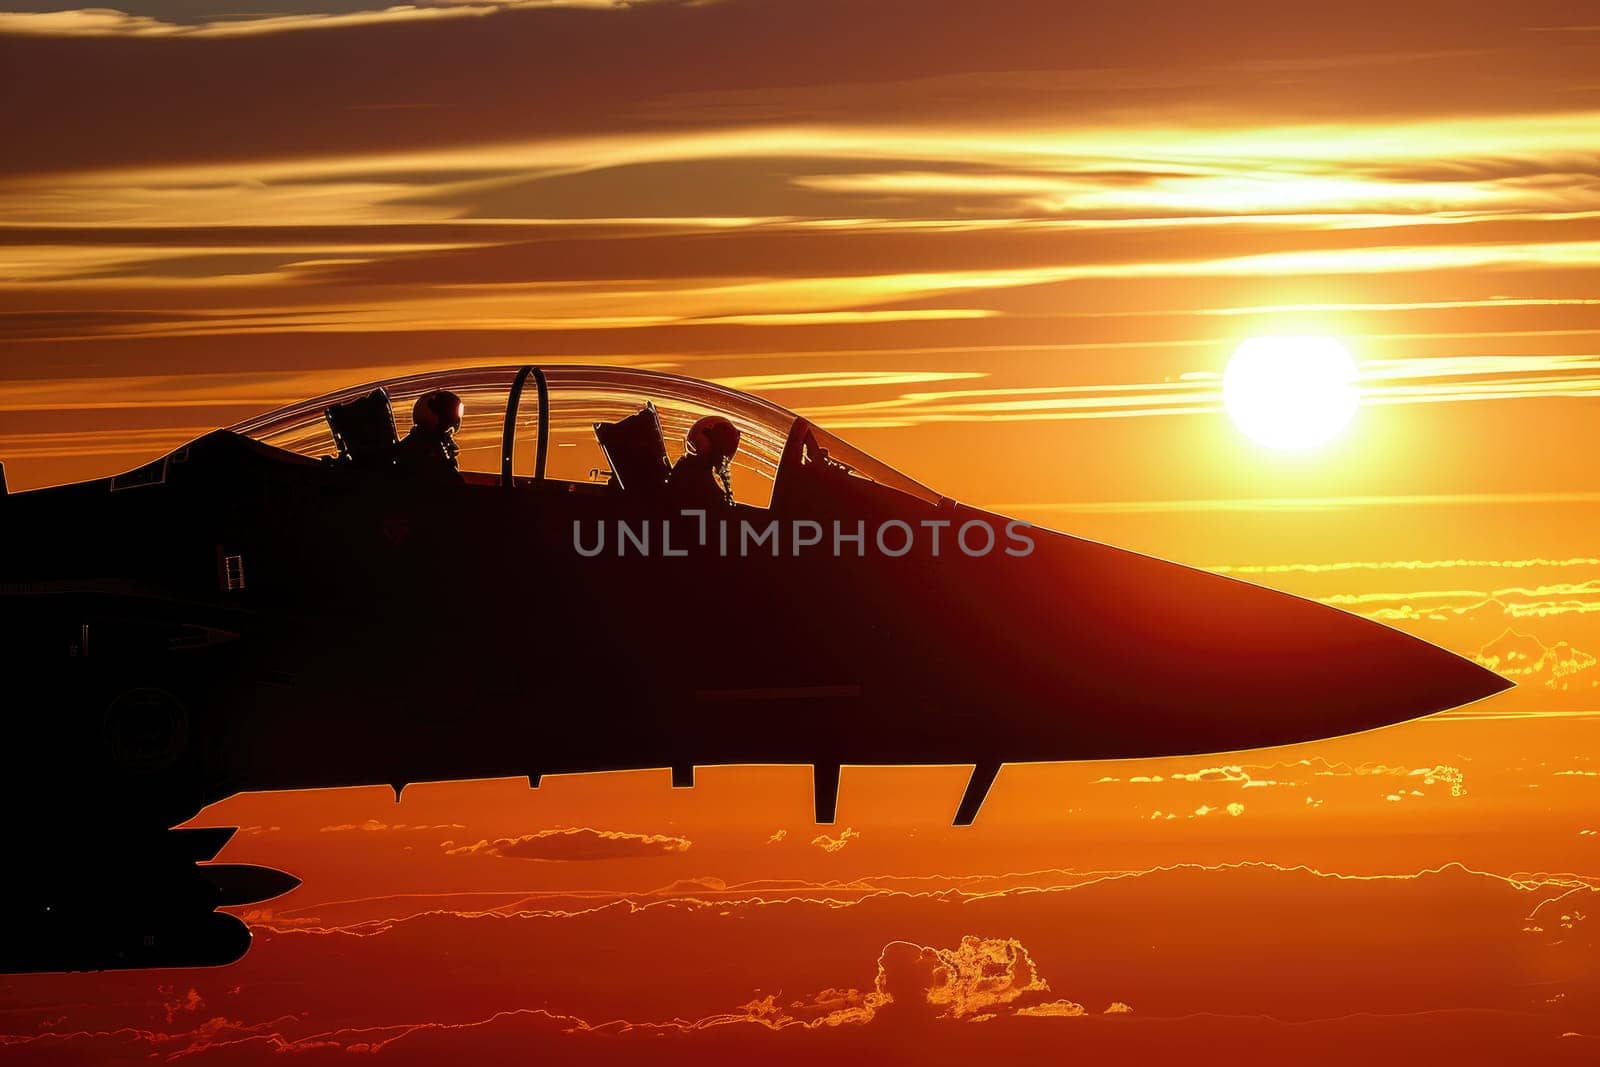 A silhouette of a fighter jet against a vibrant orange sunset, capturing the beauty and power of military aircraft